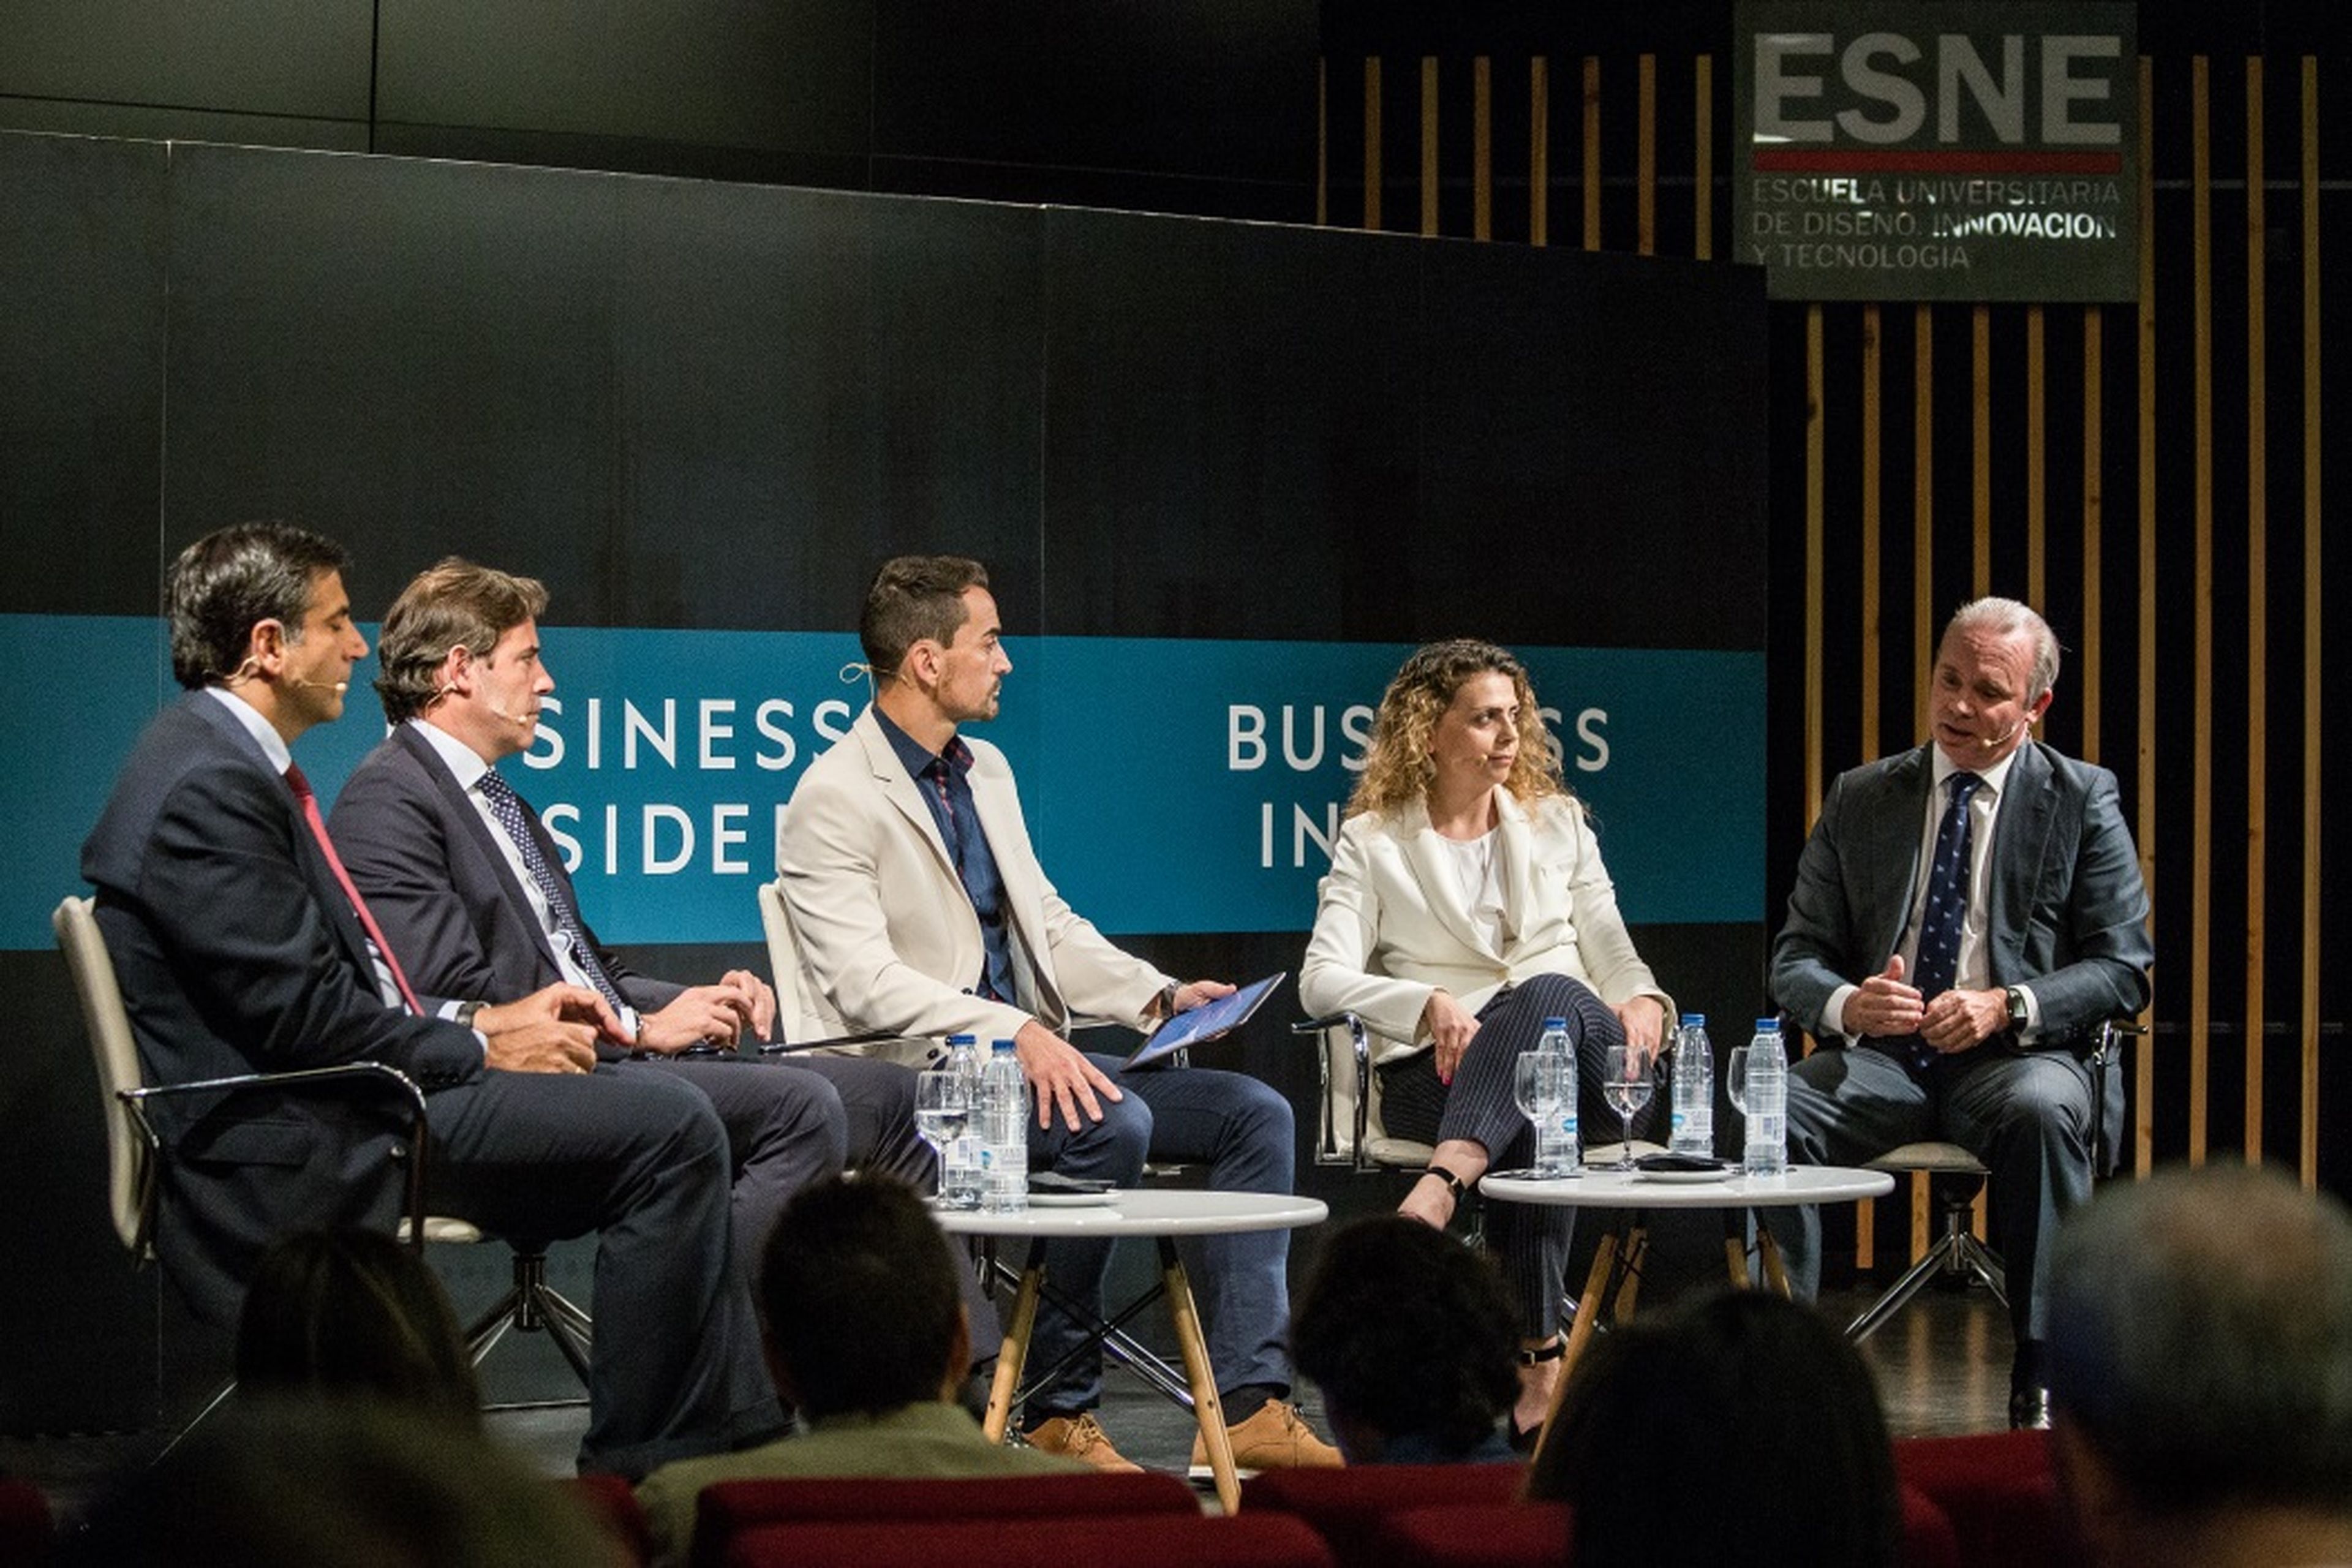 Los ponentes del II Smart Business Meeting by Business Insider.